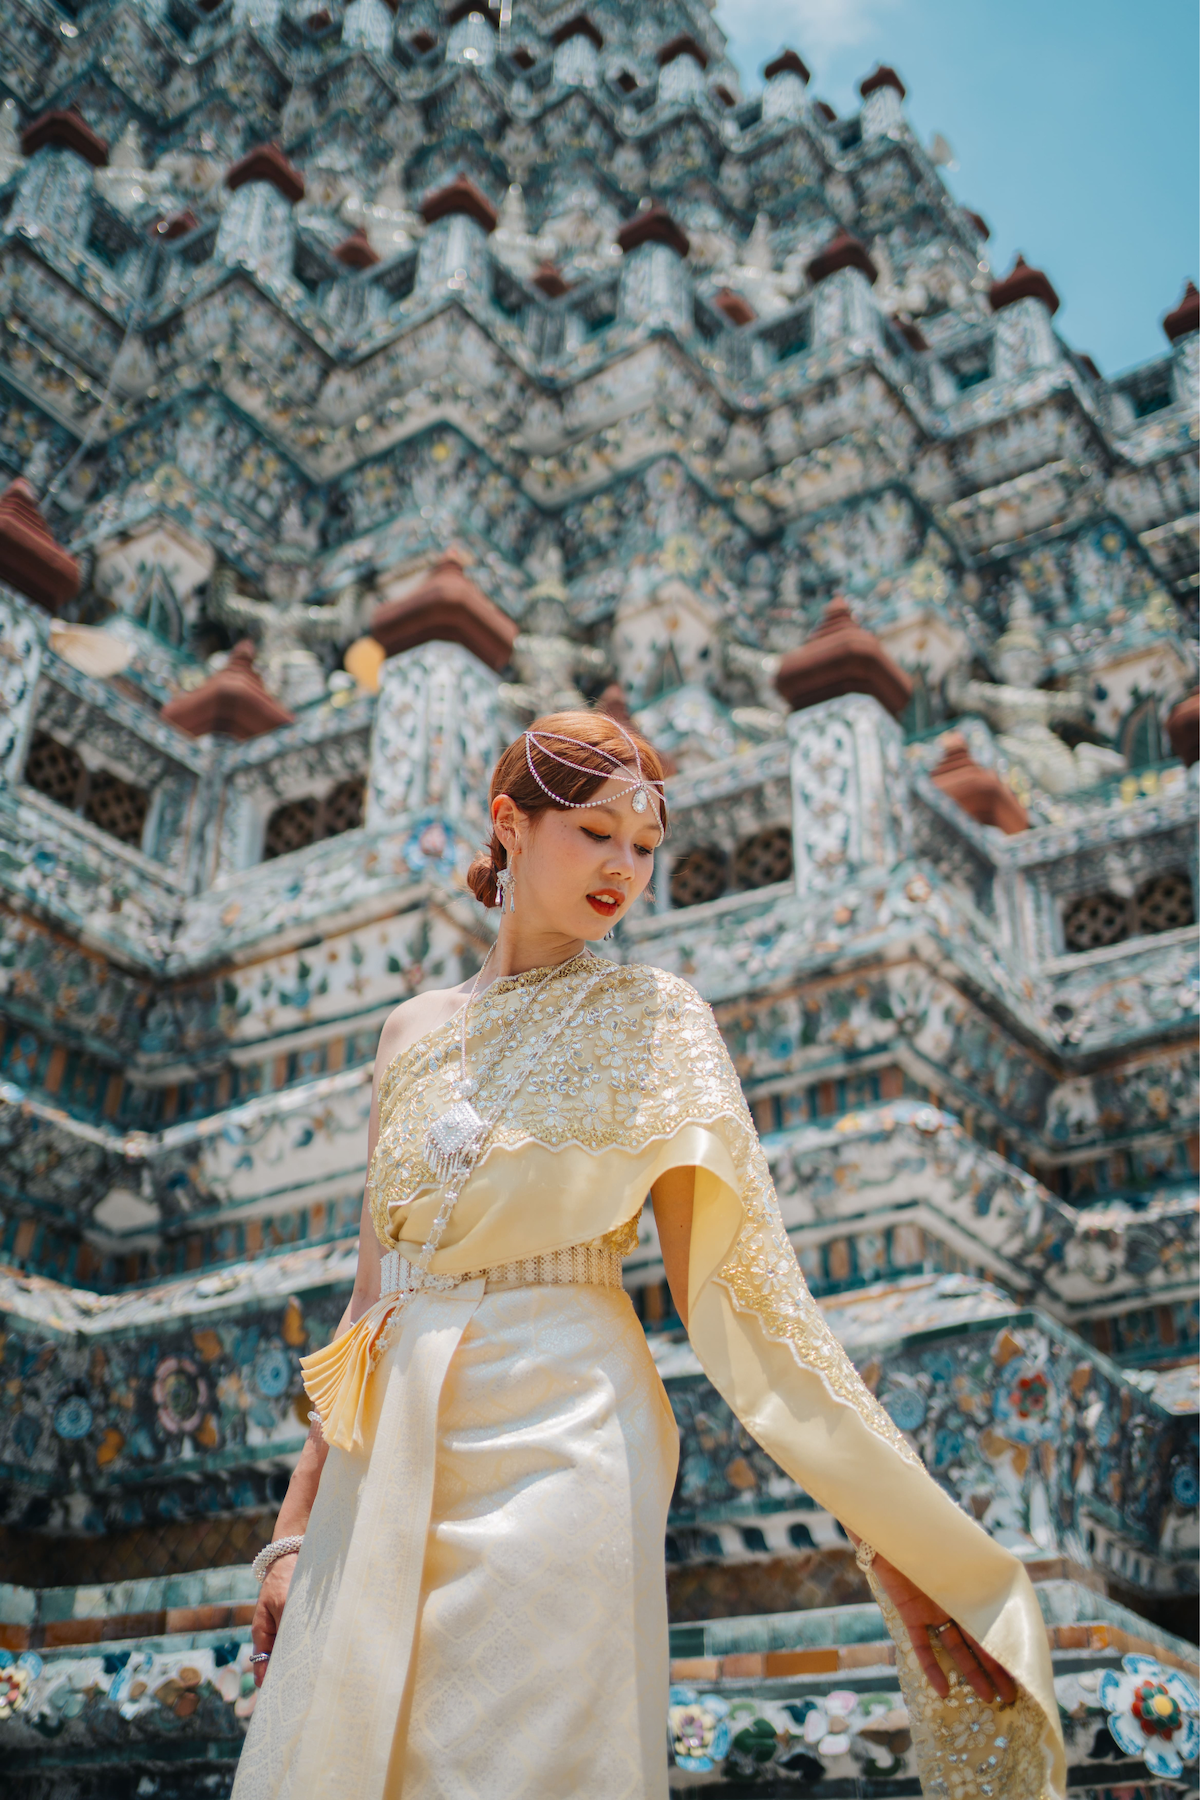 Woman in a traditional Thai outfit looking downwards with her shawl resting on her arm, with the Wat Arun temple in the background